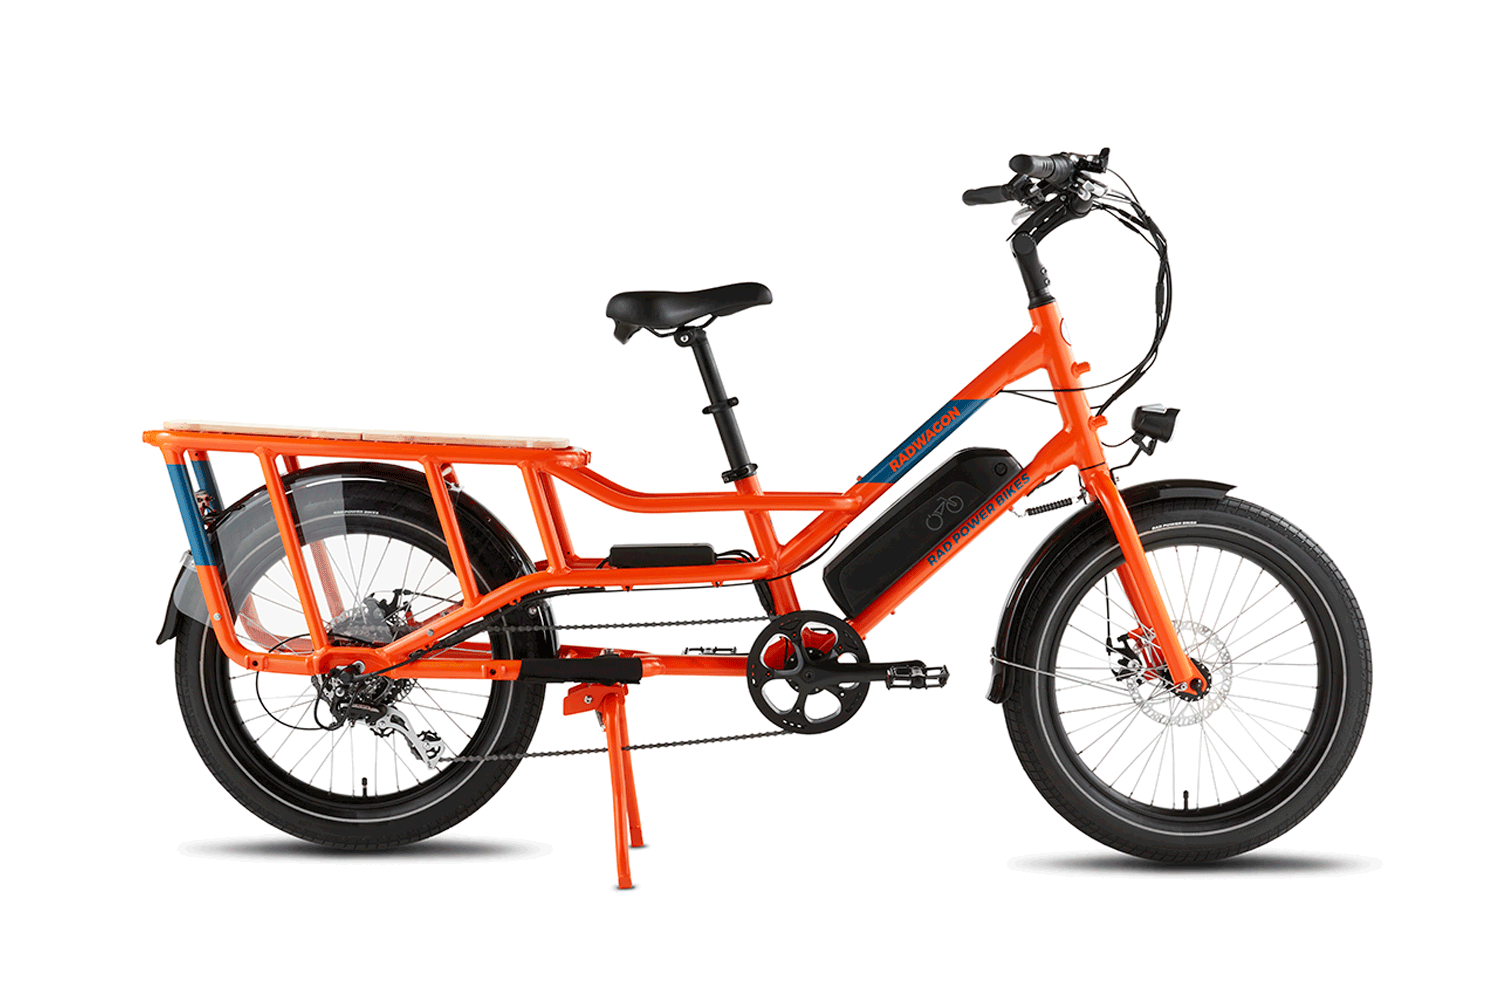 Rad Power Bikes has included new mounting points and refreshed the available accessories in an effort to give riders the versatility of a family car